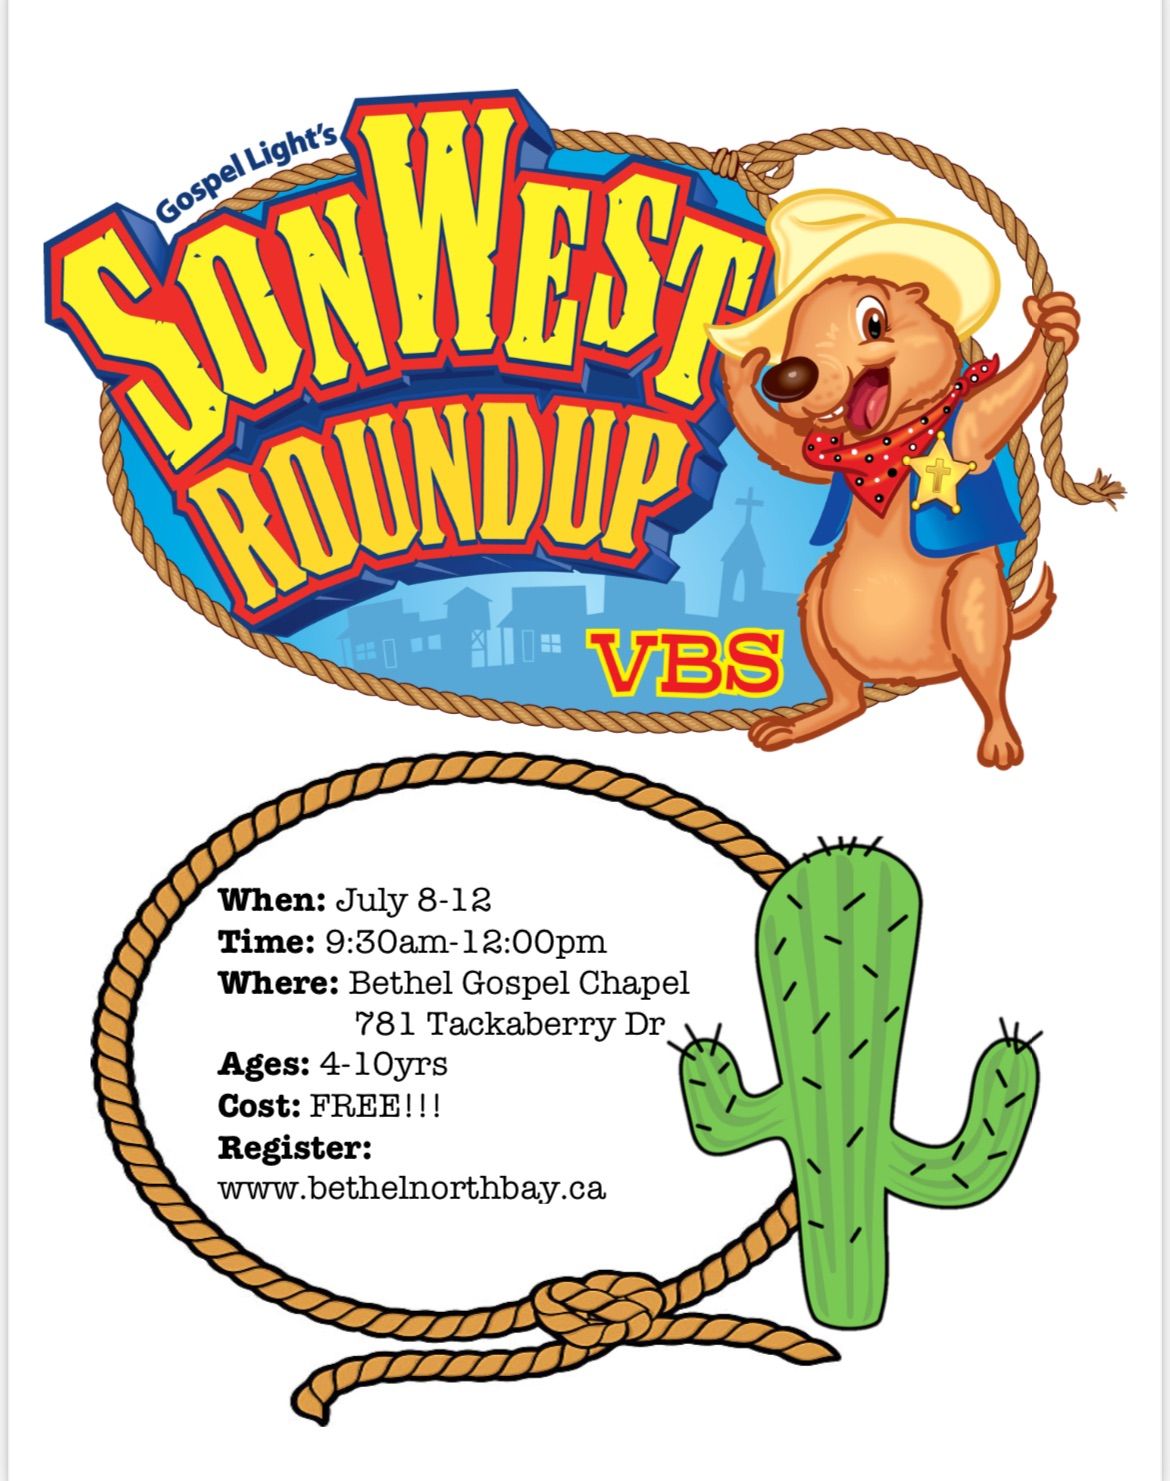 VBS: SonWest Roundup 